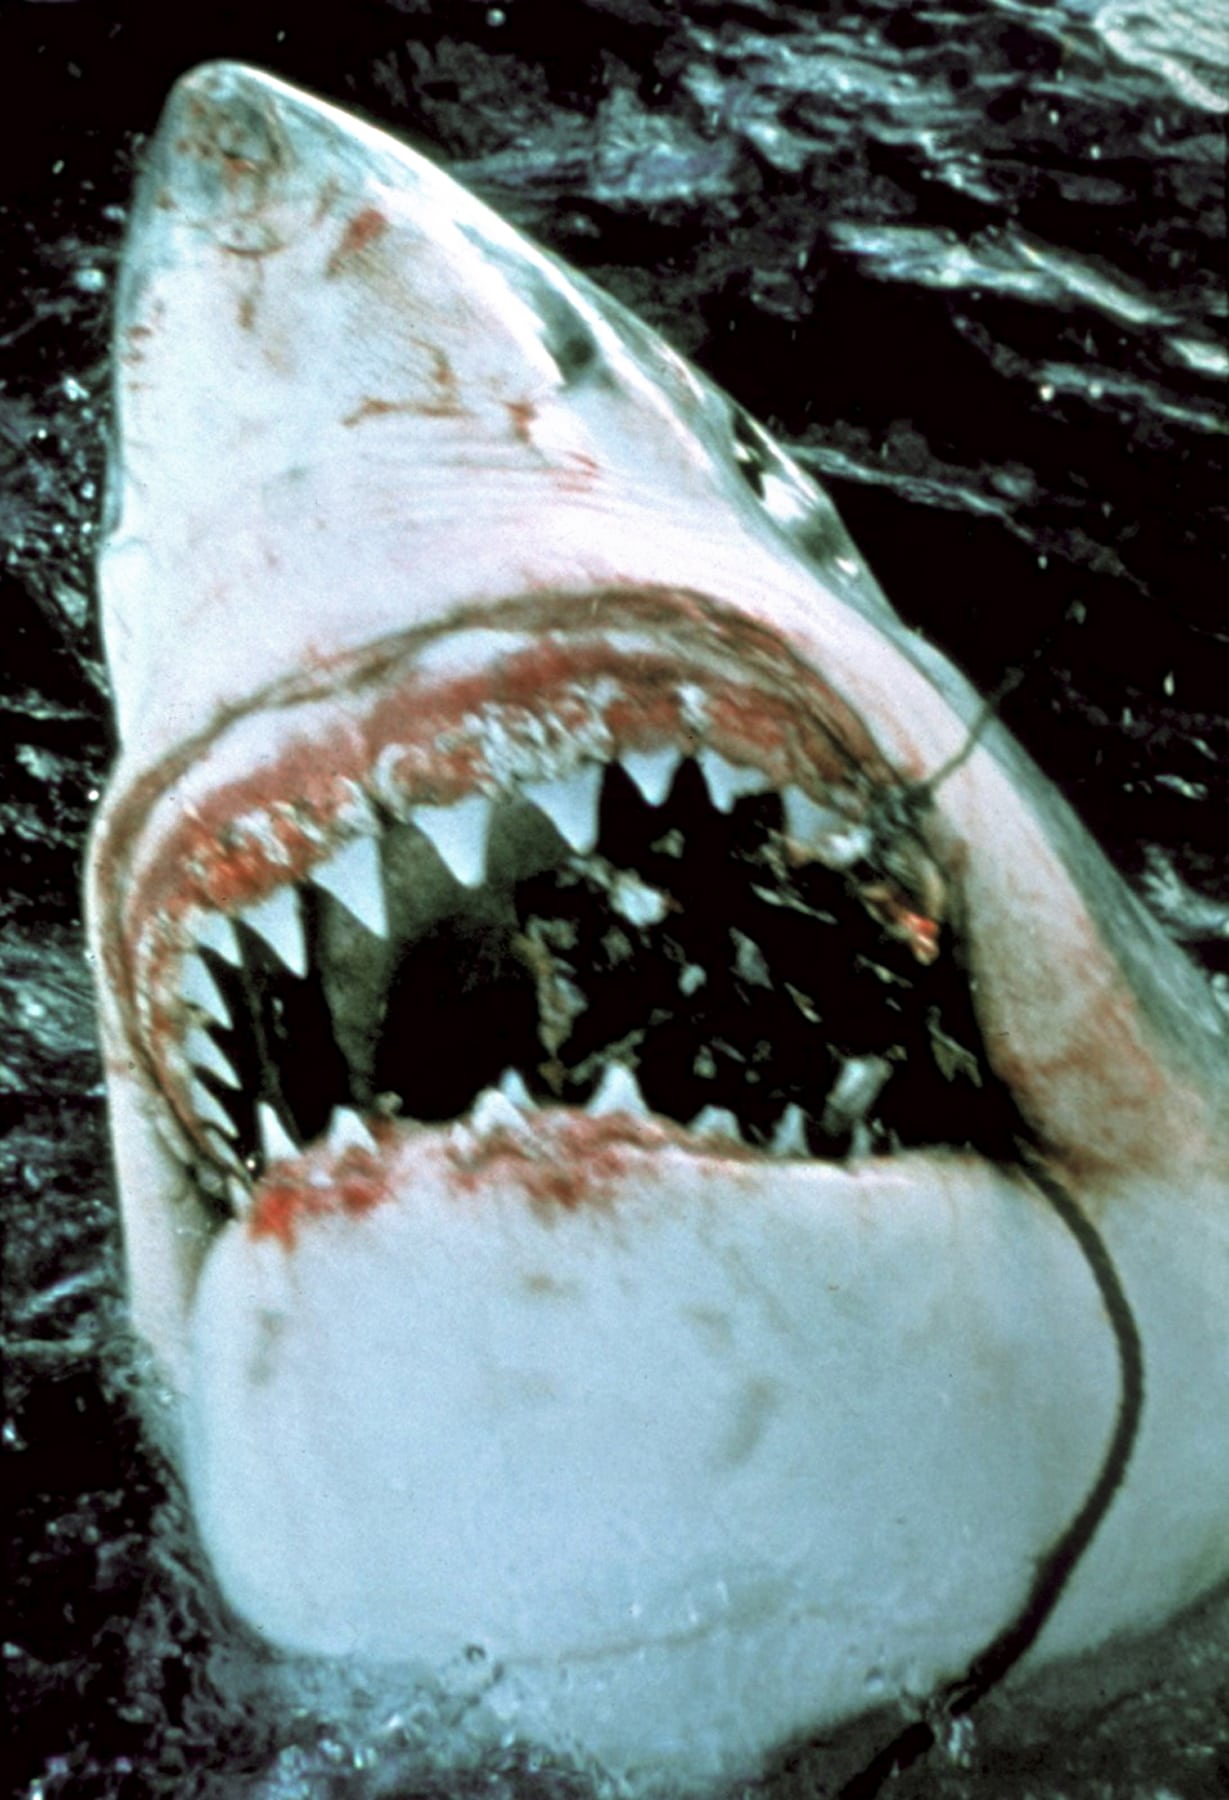 JAWS, 1975